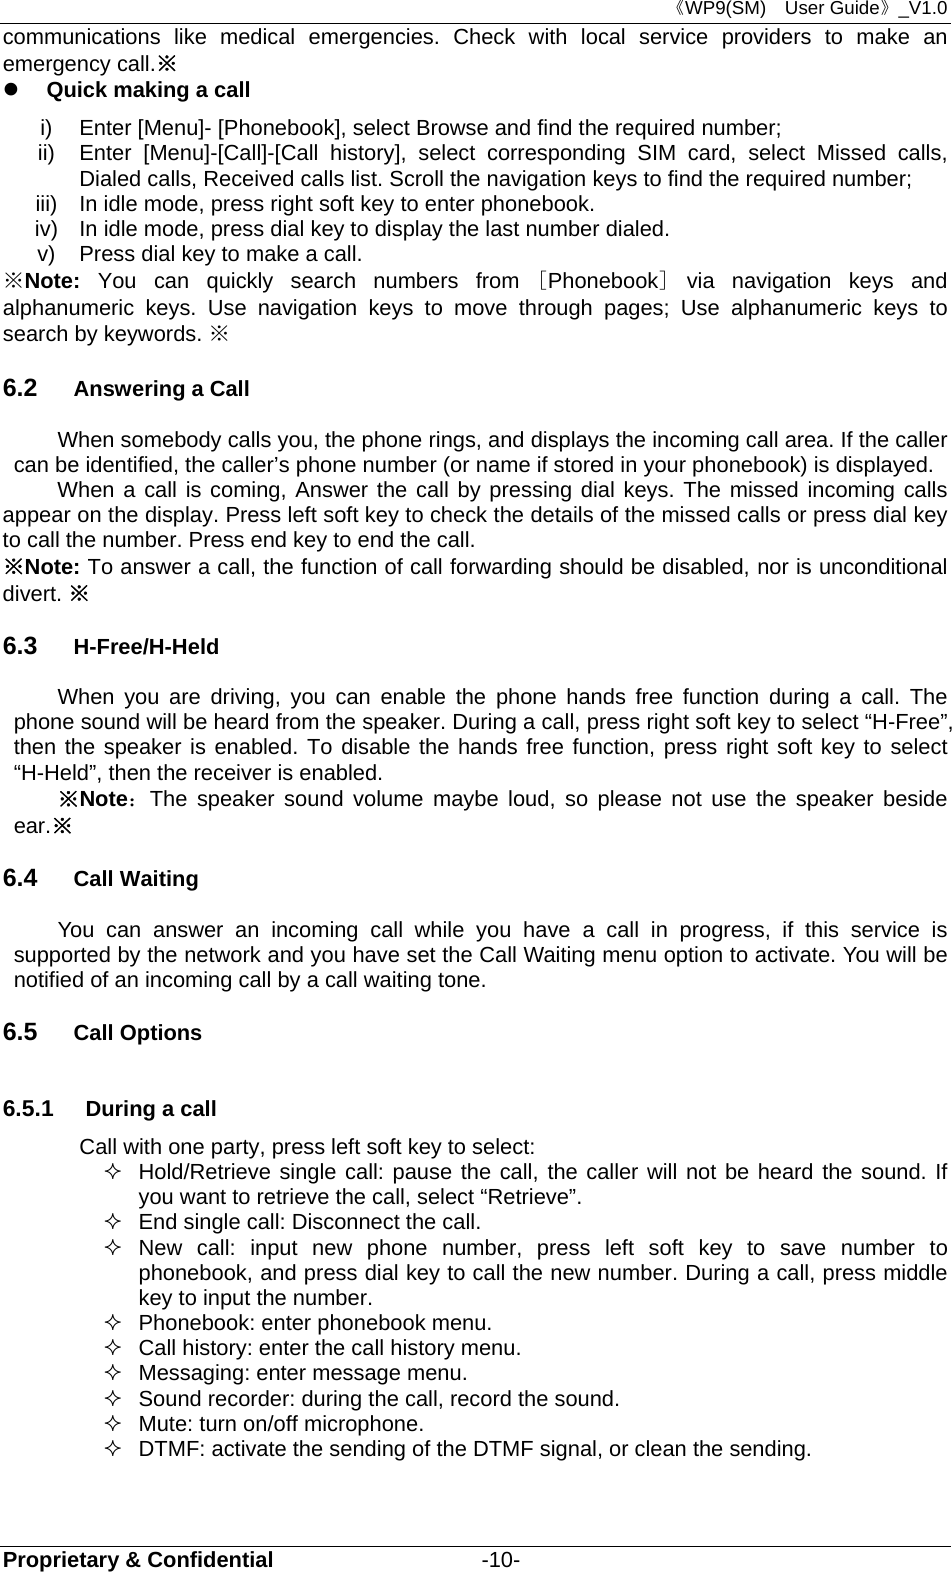 《WP9(SM)  User Guide》_V1.0 Proprietary &amp; Confidential                   -10- communications like medical emergencies. Check with local service providers to make an emergency call.※  Quick making a call i)  Enter [Menu]- [Phonebook], select Browse and find the required number; ii)  Enter [Menu]-[Call]-[Call history], select corresponding SIM card, select Missed calls, Dialed calls, Received calls list. Scroll the navigation keys to find the required number; iii)  In idle mode, press right soft key to enter phonebook. iv)  In idle mode, press dial key to display the last number dialed. v)  Press dial key to make a call. ※Note: You can quickly search numbers from [Phonebook] via navigation keys and alphanumeric keys. Use navigation keys to move through pages; Use alphanumeric keys to search by keywords. ※   6.2  Answering a Call When somebody calls you, the phone rings, and displays the incoming call area. If the caller can be identified, the caller’s phone number (or name if stored in your phonebook) is displayed.   When a call is coming, Answer the call by pressing dial keys. The missed incoming calls appear on the display. Press left soft key to check the details of the missed calls or press dial key to call the number. Press end key to end the call. ※Note: To answer a call, the function of call forwarding should be disabled, nor is unconditional divert. ※ 6.3  H-Free/H-Held When you are driving, you can enable the phone hands free function during a call. The phone sound will be heard from the speaker. During a call, press right soft key to select “H-Free”, then the speaker is enabled. To disable the hands free function, press right soft key to select “H-Held”, then the receiver is enabled. ※Note：The speaker sound volume maybe loud, so please not use the speaker beside ear.※ 6.4  Call Waiting You can answer an incoming call while you have a call in progress, if this service is supported by the network and you have set the Call Waiting menu option to activate. You will be notified of an incoming call by a call waiting tone. 6.5  Call Options 6.5.1  During a call Call with one party, press left soft key to select:   Hold/Retrieve single call: pause the call, the caller will not be heard the sound. If you want to retrieve the call, select “Retrieve”.   End single call: Disconnect the call.  New call: input new phone number, press left soft key to save number to phonebook, and press dial key to call the new number. During a call, press middle   key to input the number.   Phonebook: enter phonebook menu.   Call history: enter the call history menu.   Messaging: enter message menu.   Sound recorder: during the call, record the sound.   Mute: turn on/off microphone.   DTMF: activate the sending of the DTMF signal, or clean the sending. 